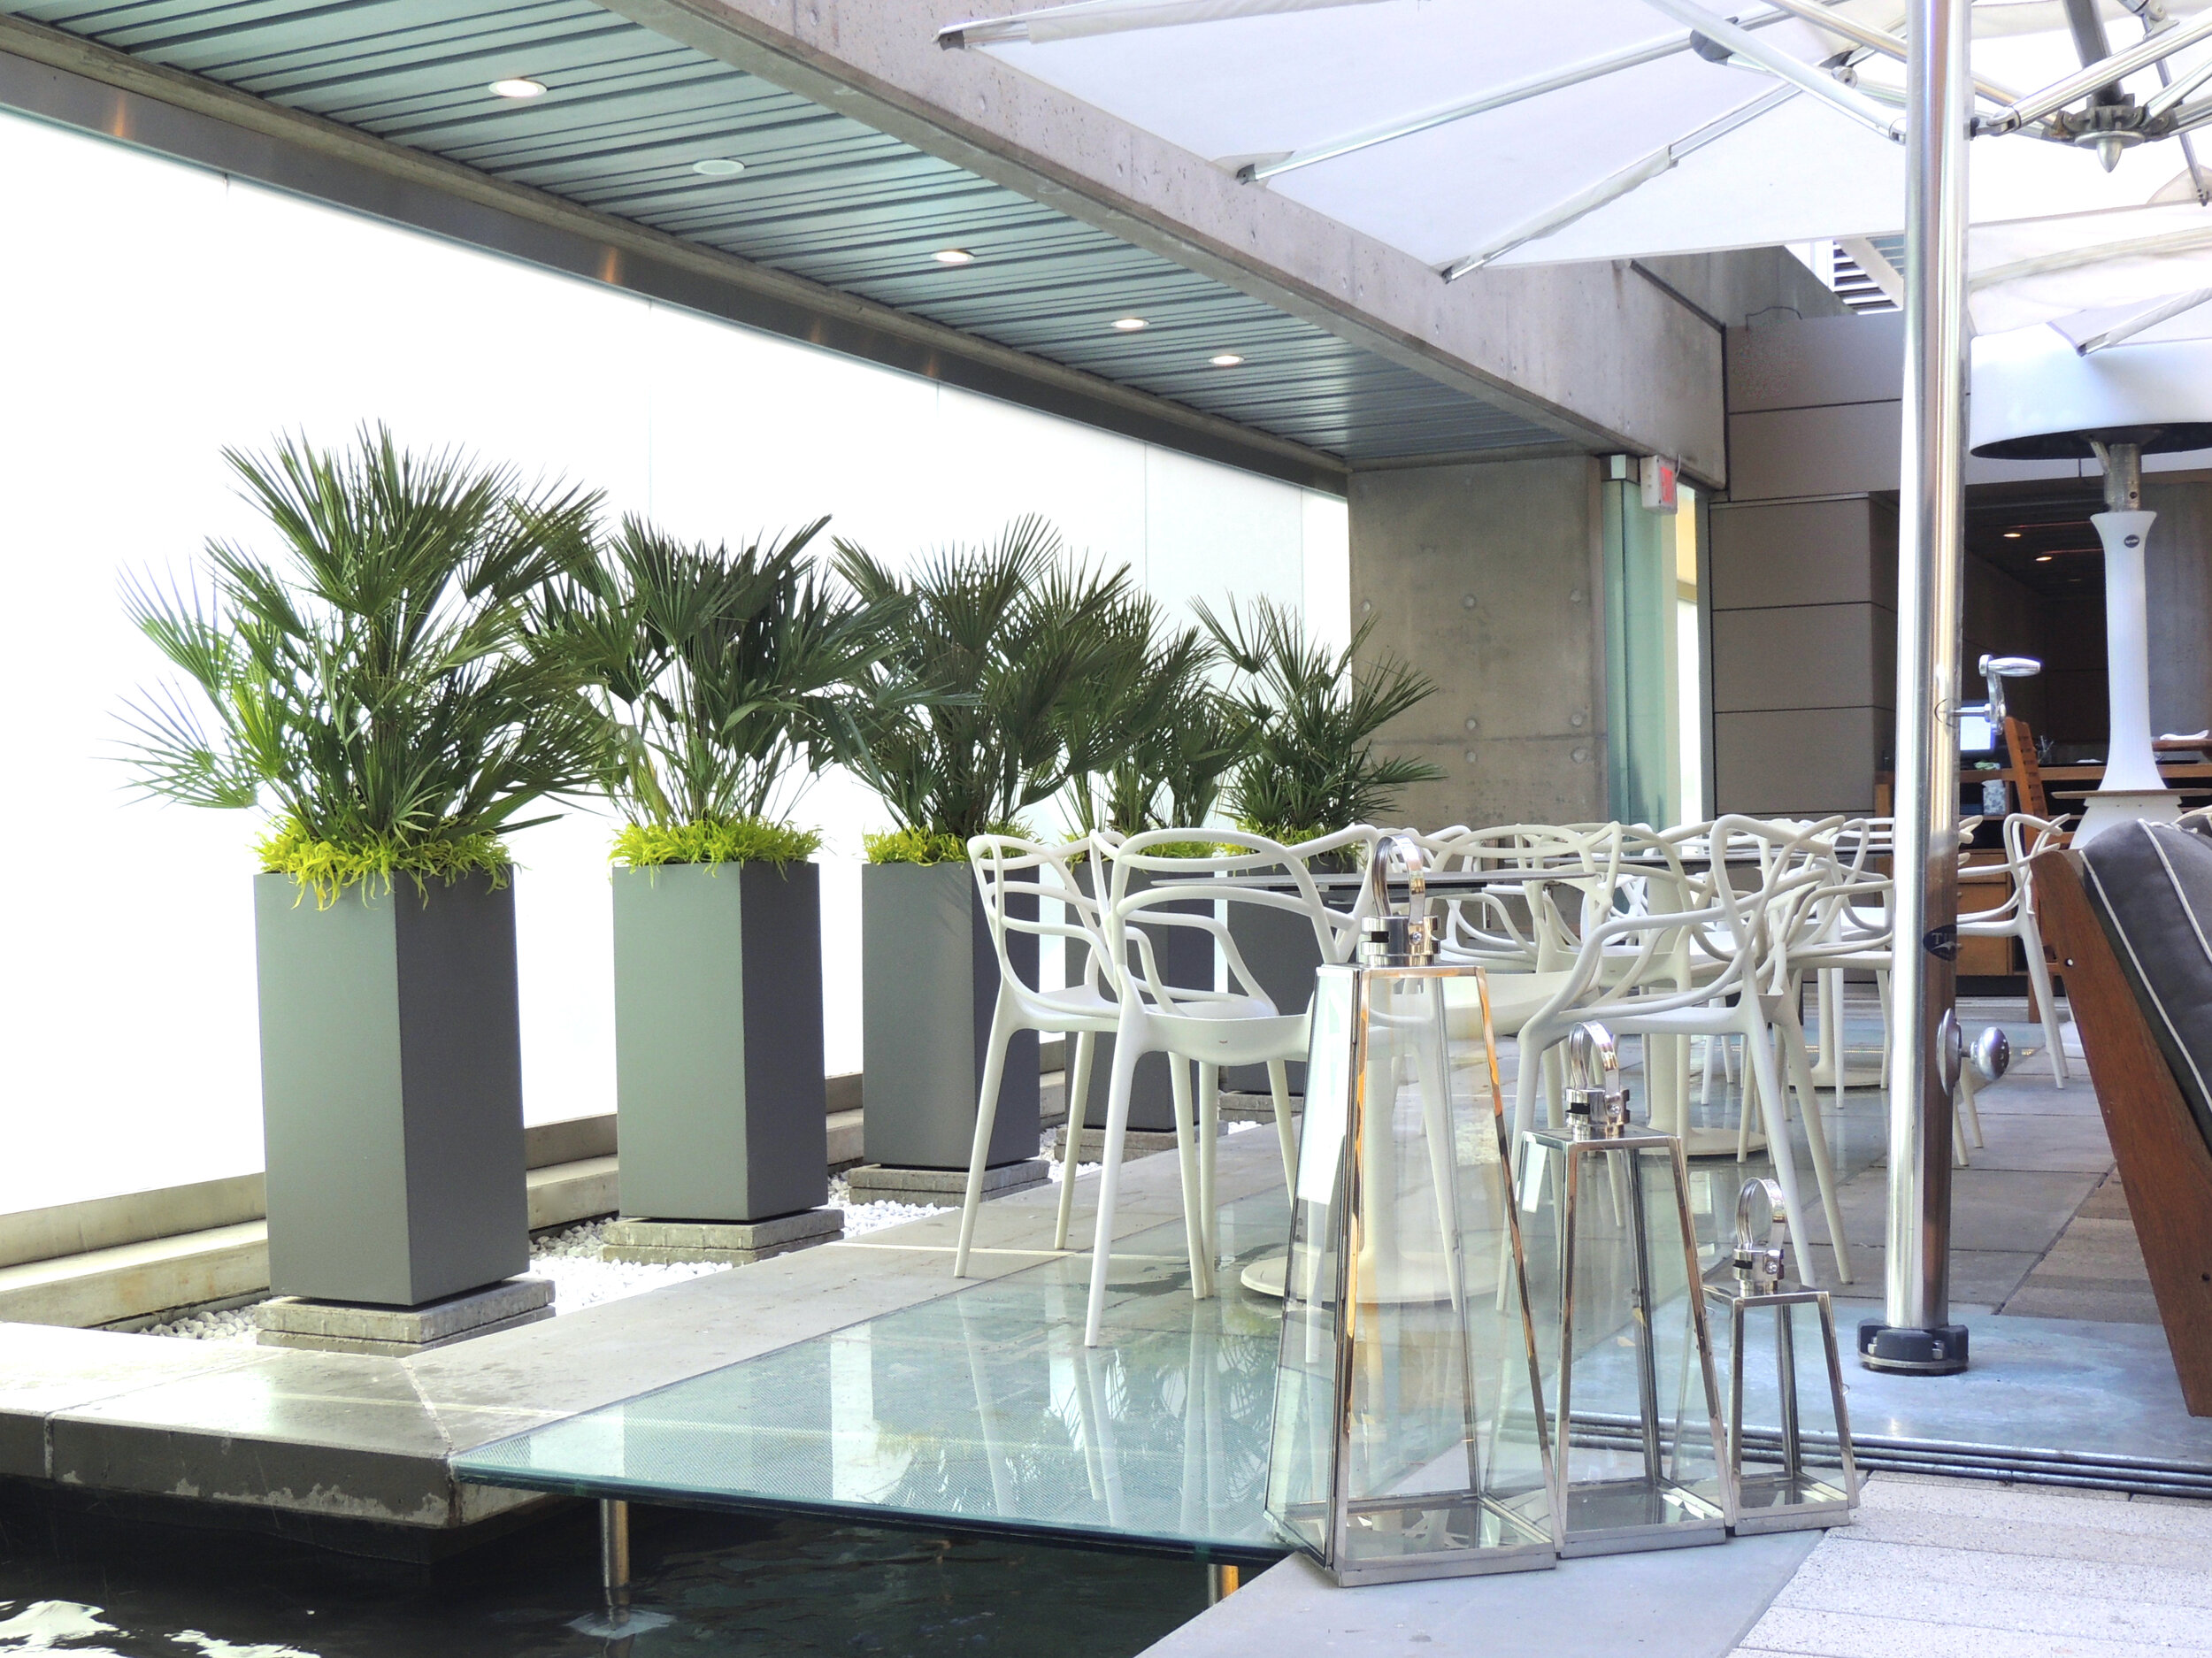 Large decorative pedestal with palms in a commercial eating area